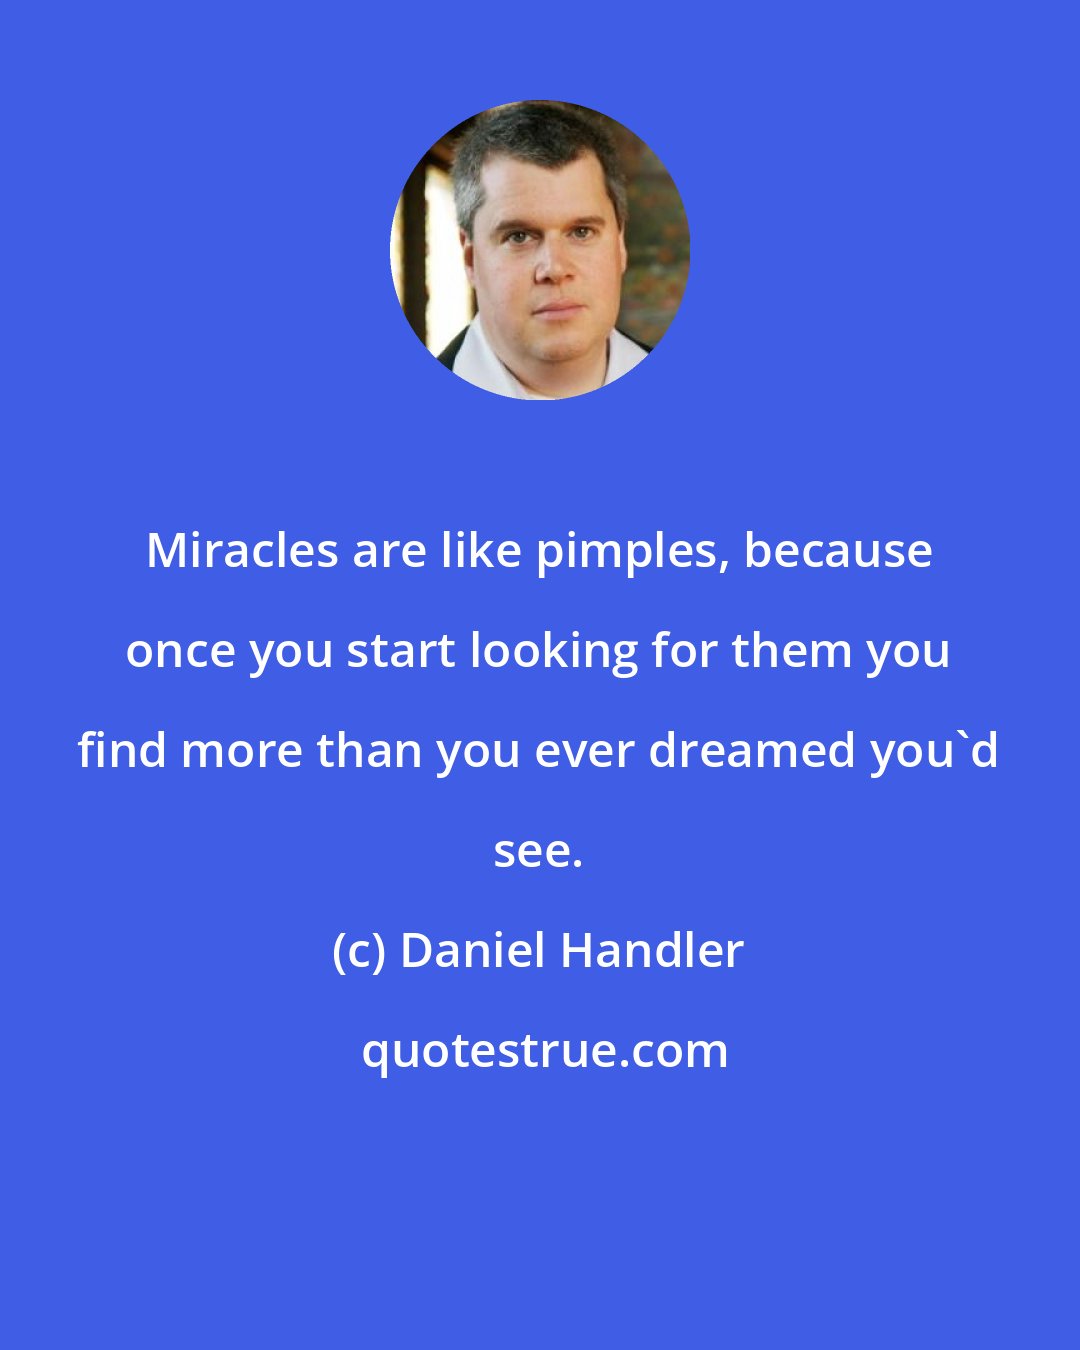 Daniel Handler: Miracles are like pimples, because once you start looking for them you find more than you ever dreamed you'd see.